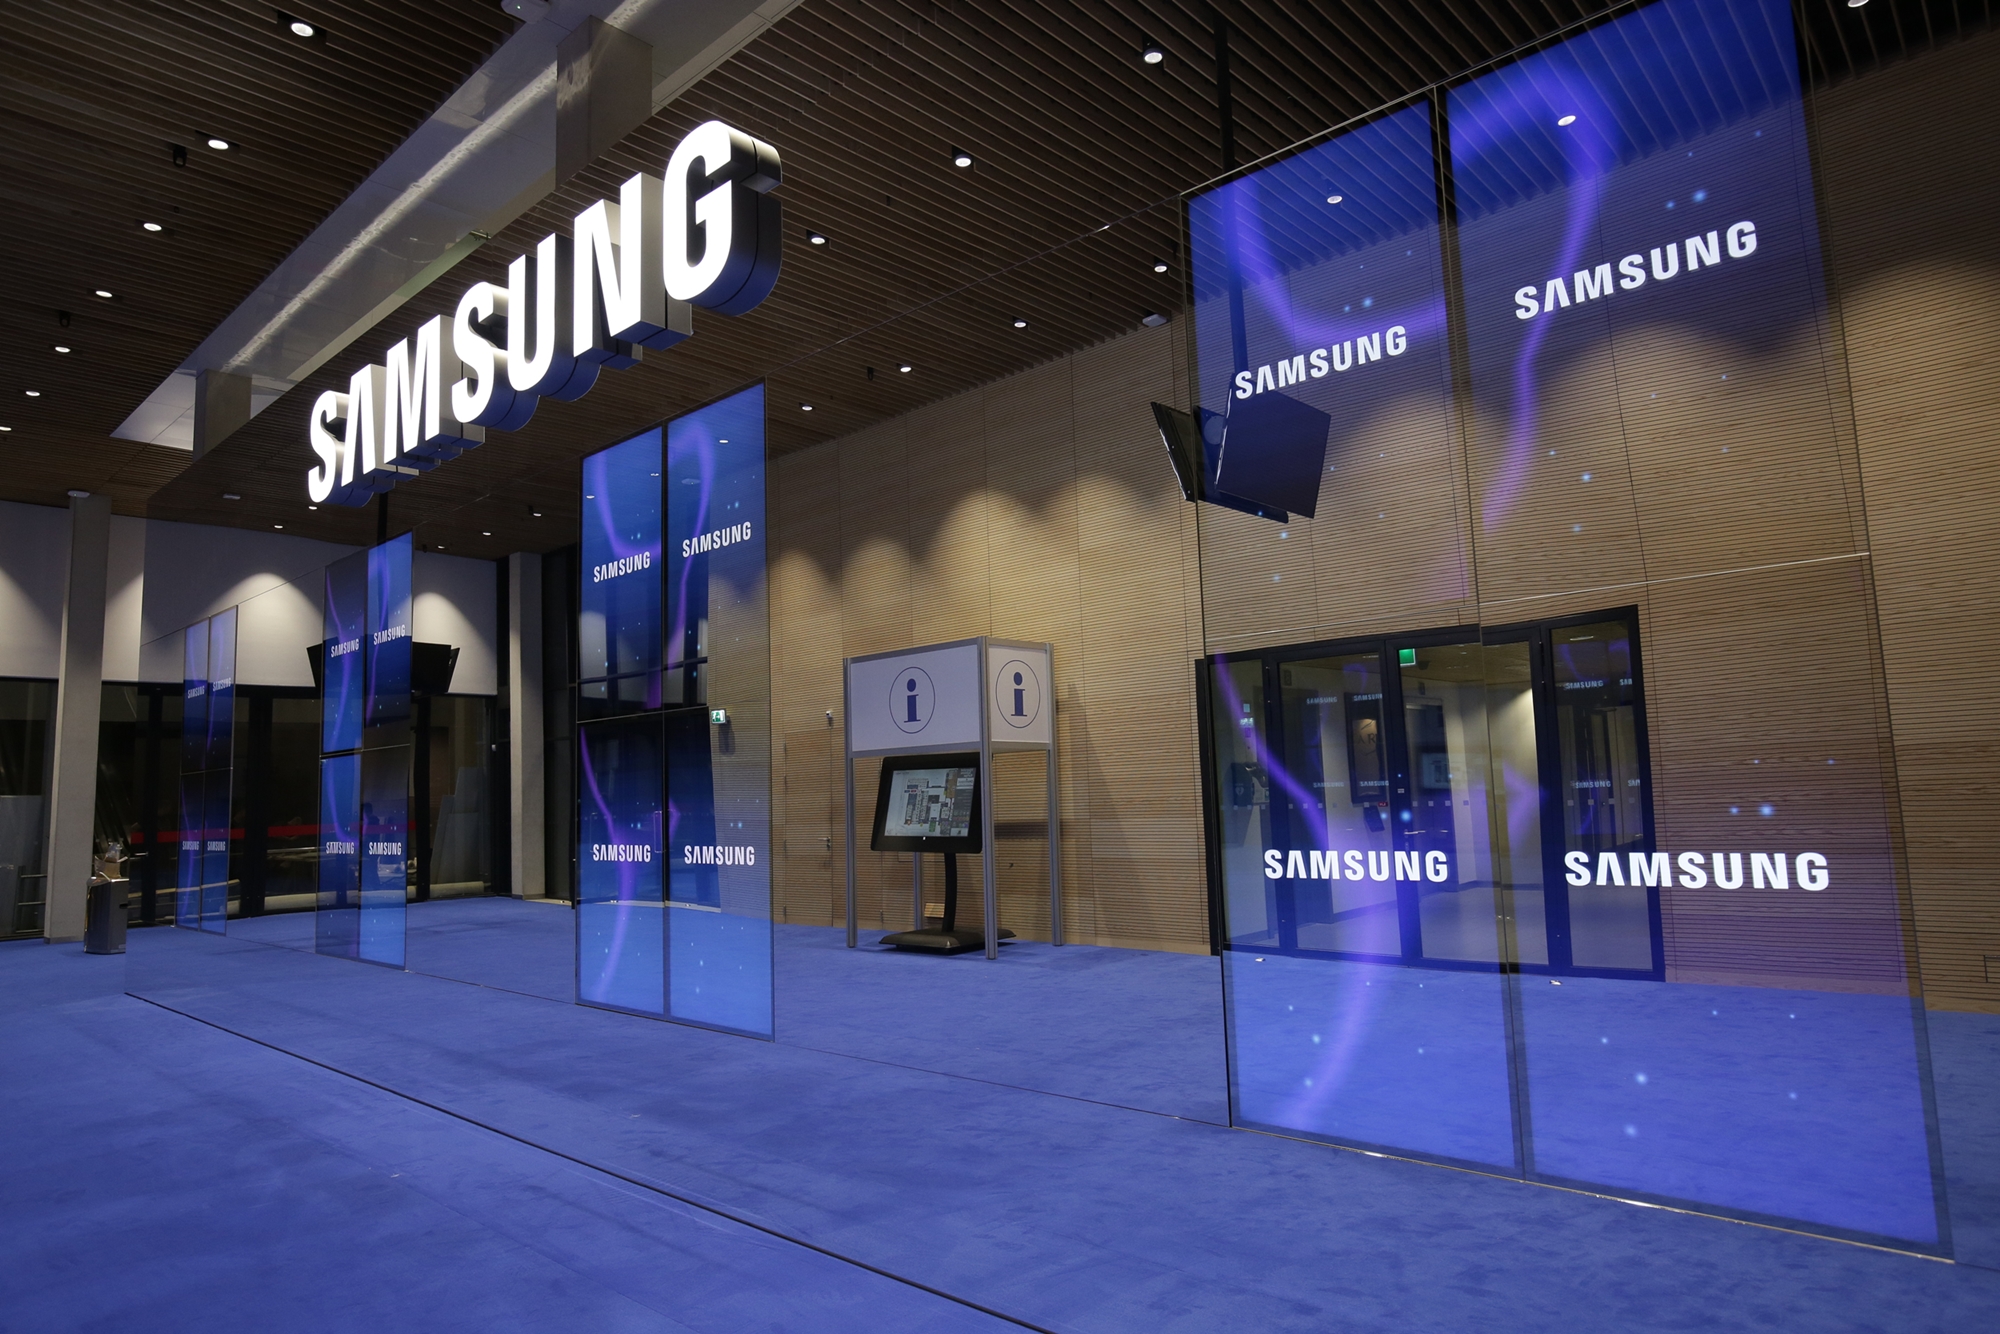 Samsung to invest $1 billion in chip manufacturing facility